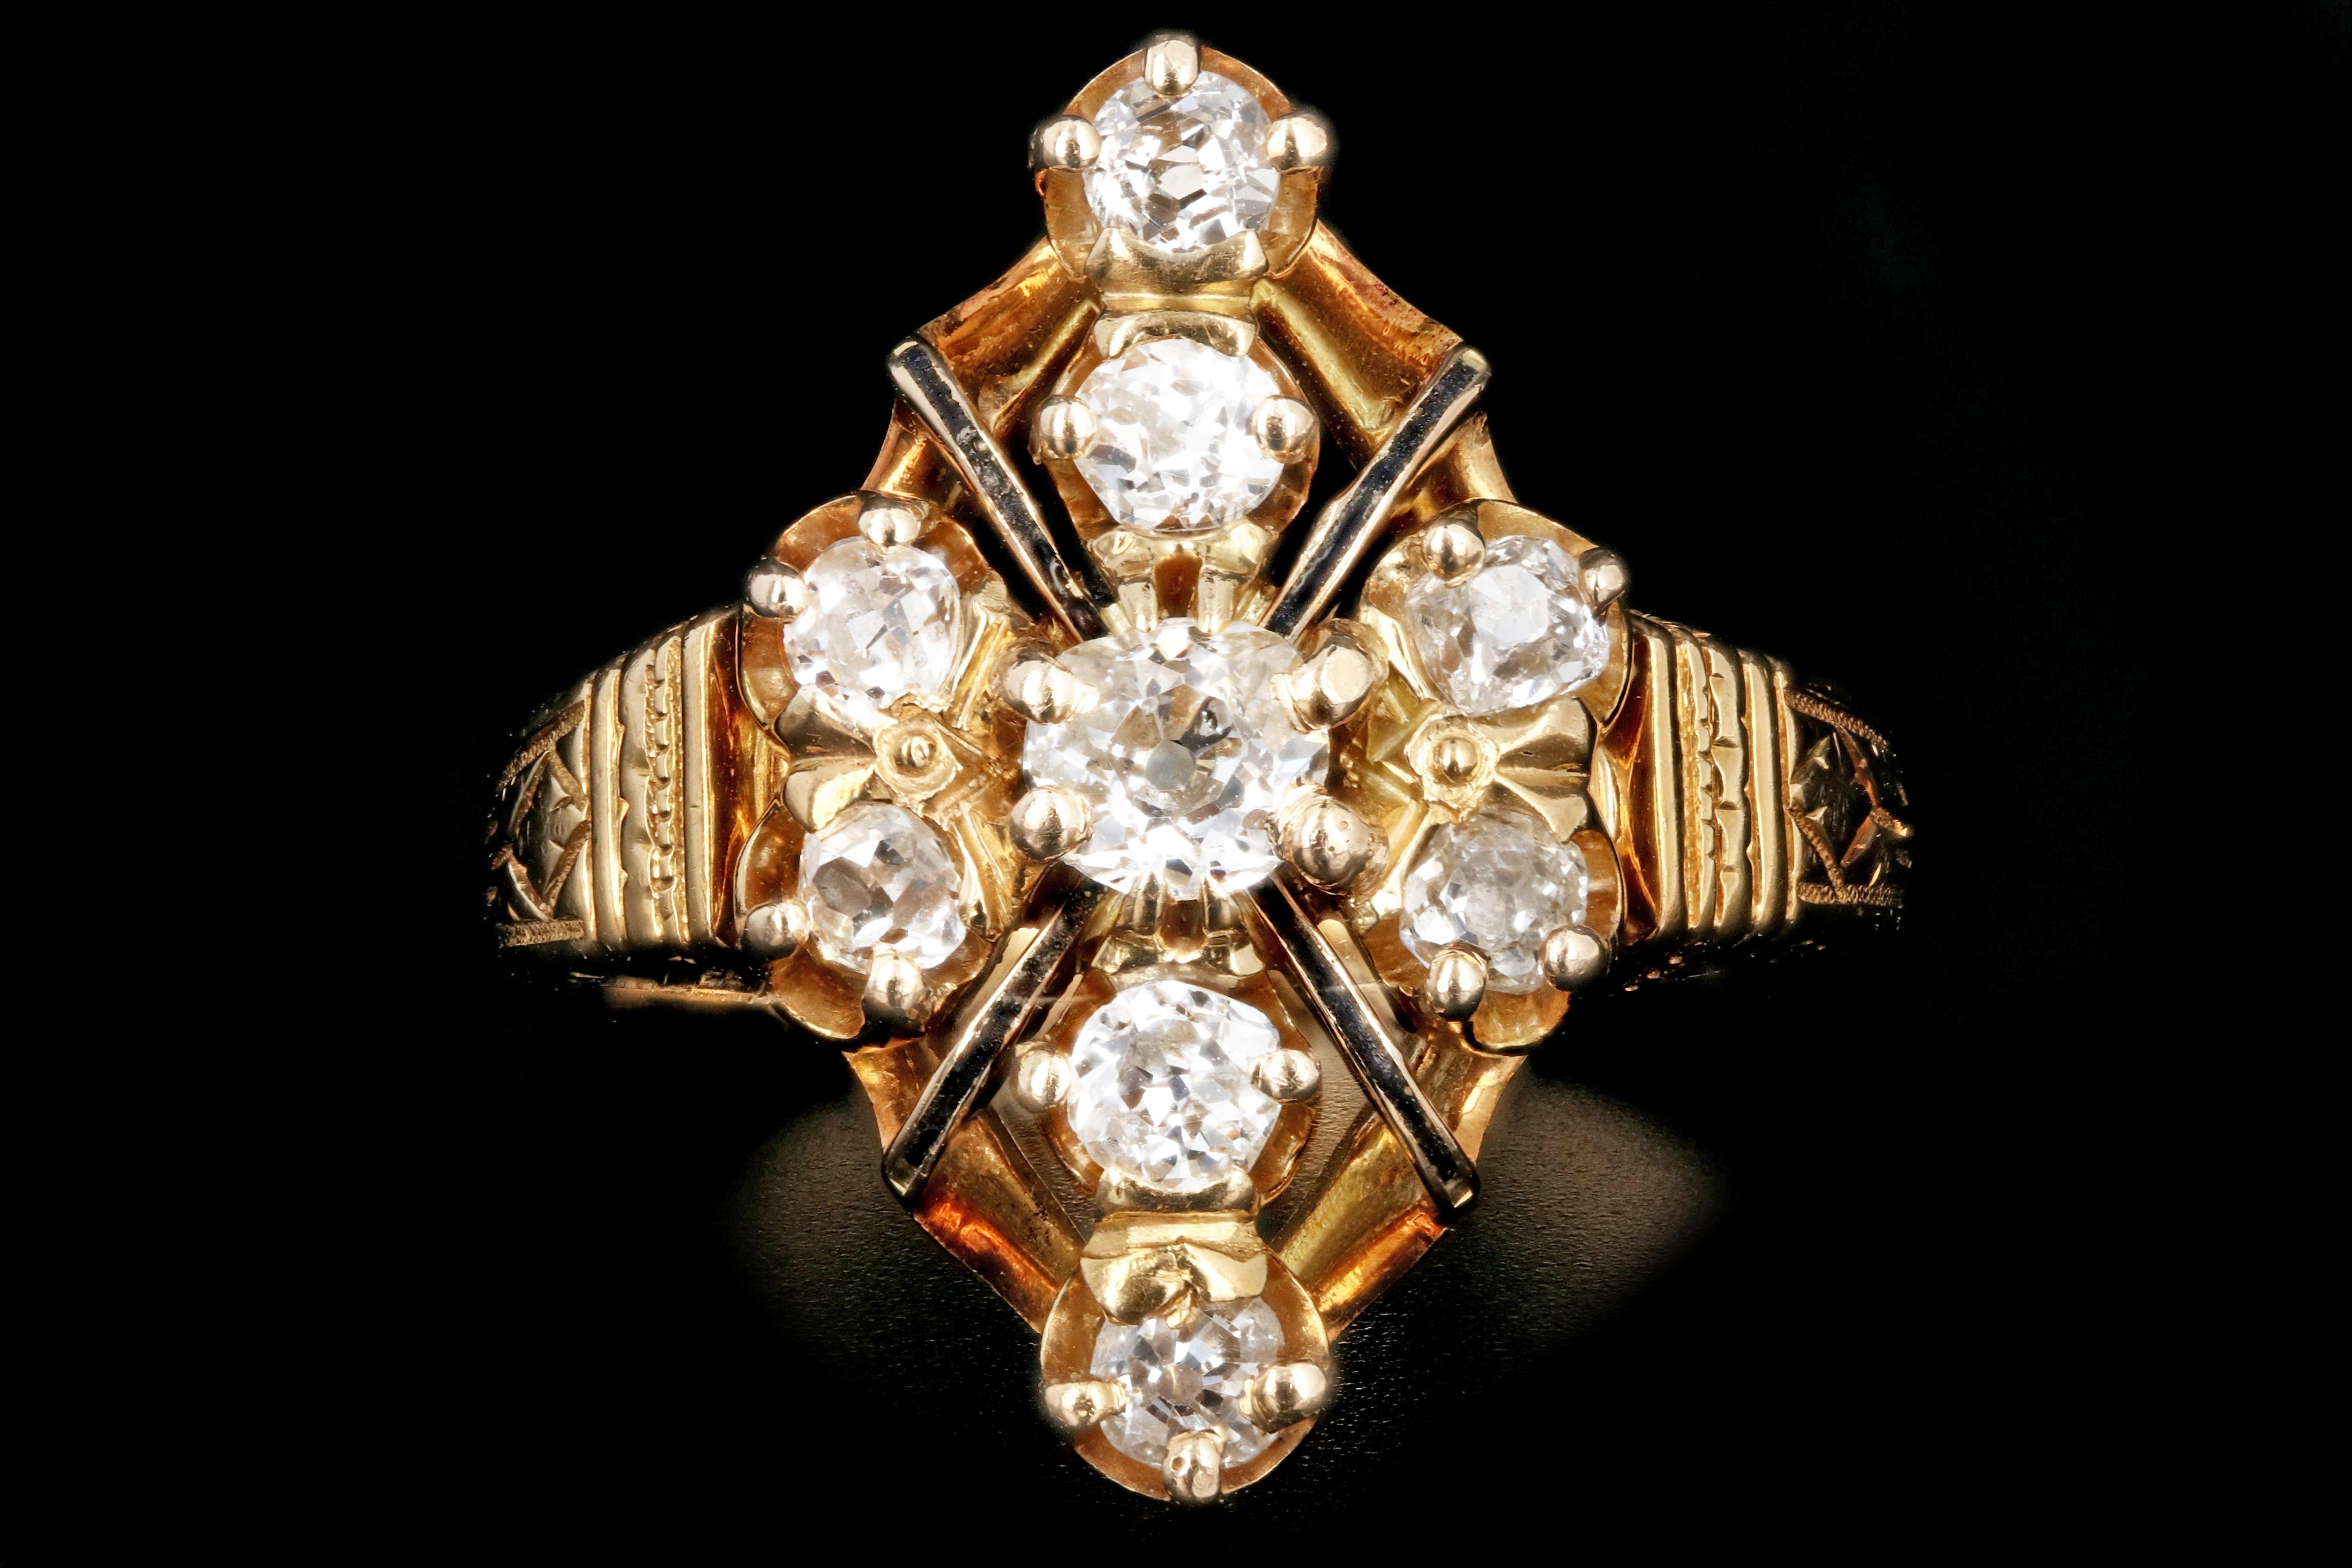 Era: Victorian

Composition: 18K Yellow Gold

Primary Stone: Old Mine Cut Diamond

Carat Weight: 1 Carat

Color: G-H

Clarity: Vs2-Si1

Ring Weight: 3.8 DWT

Ring Size: 7.25